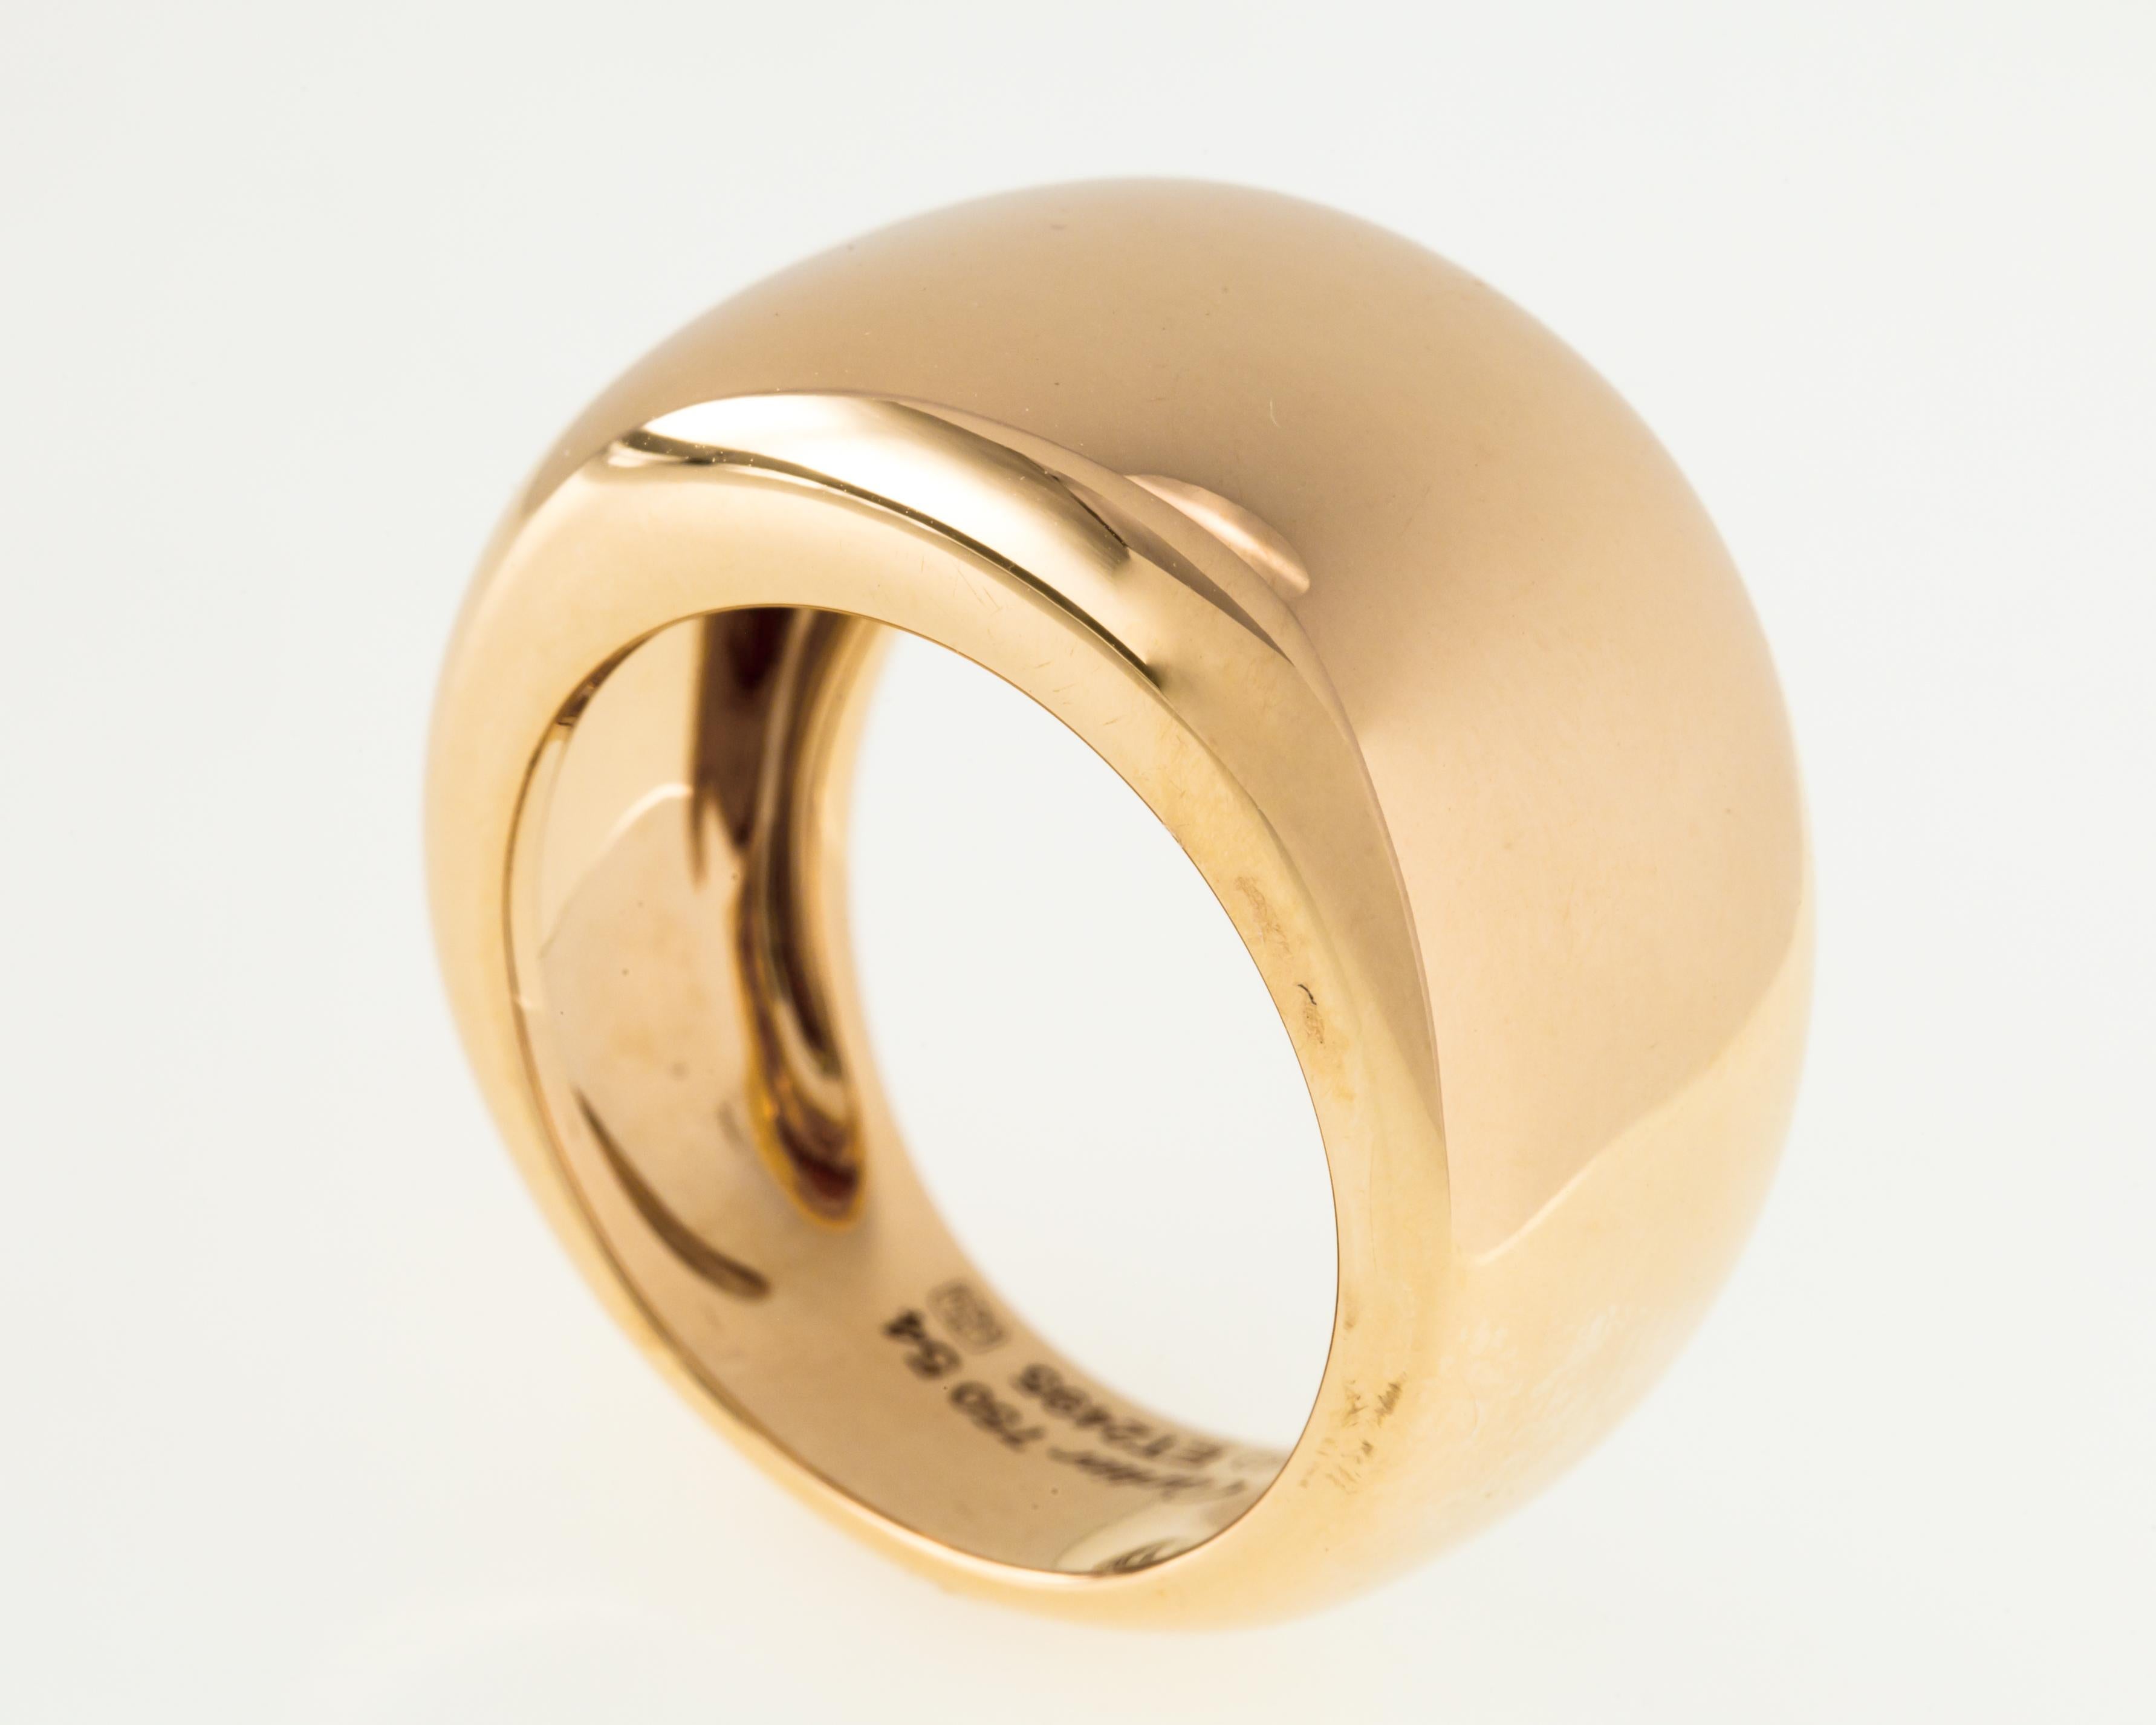 Beautiful 18k Yellow Gold Dome Ring by Cartier
La Nouvelle Vague
Size 54 (US Size 7)
Total Mass = 12.8 grams
Width of Ring = Appx 13 mm